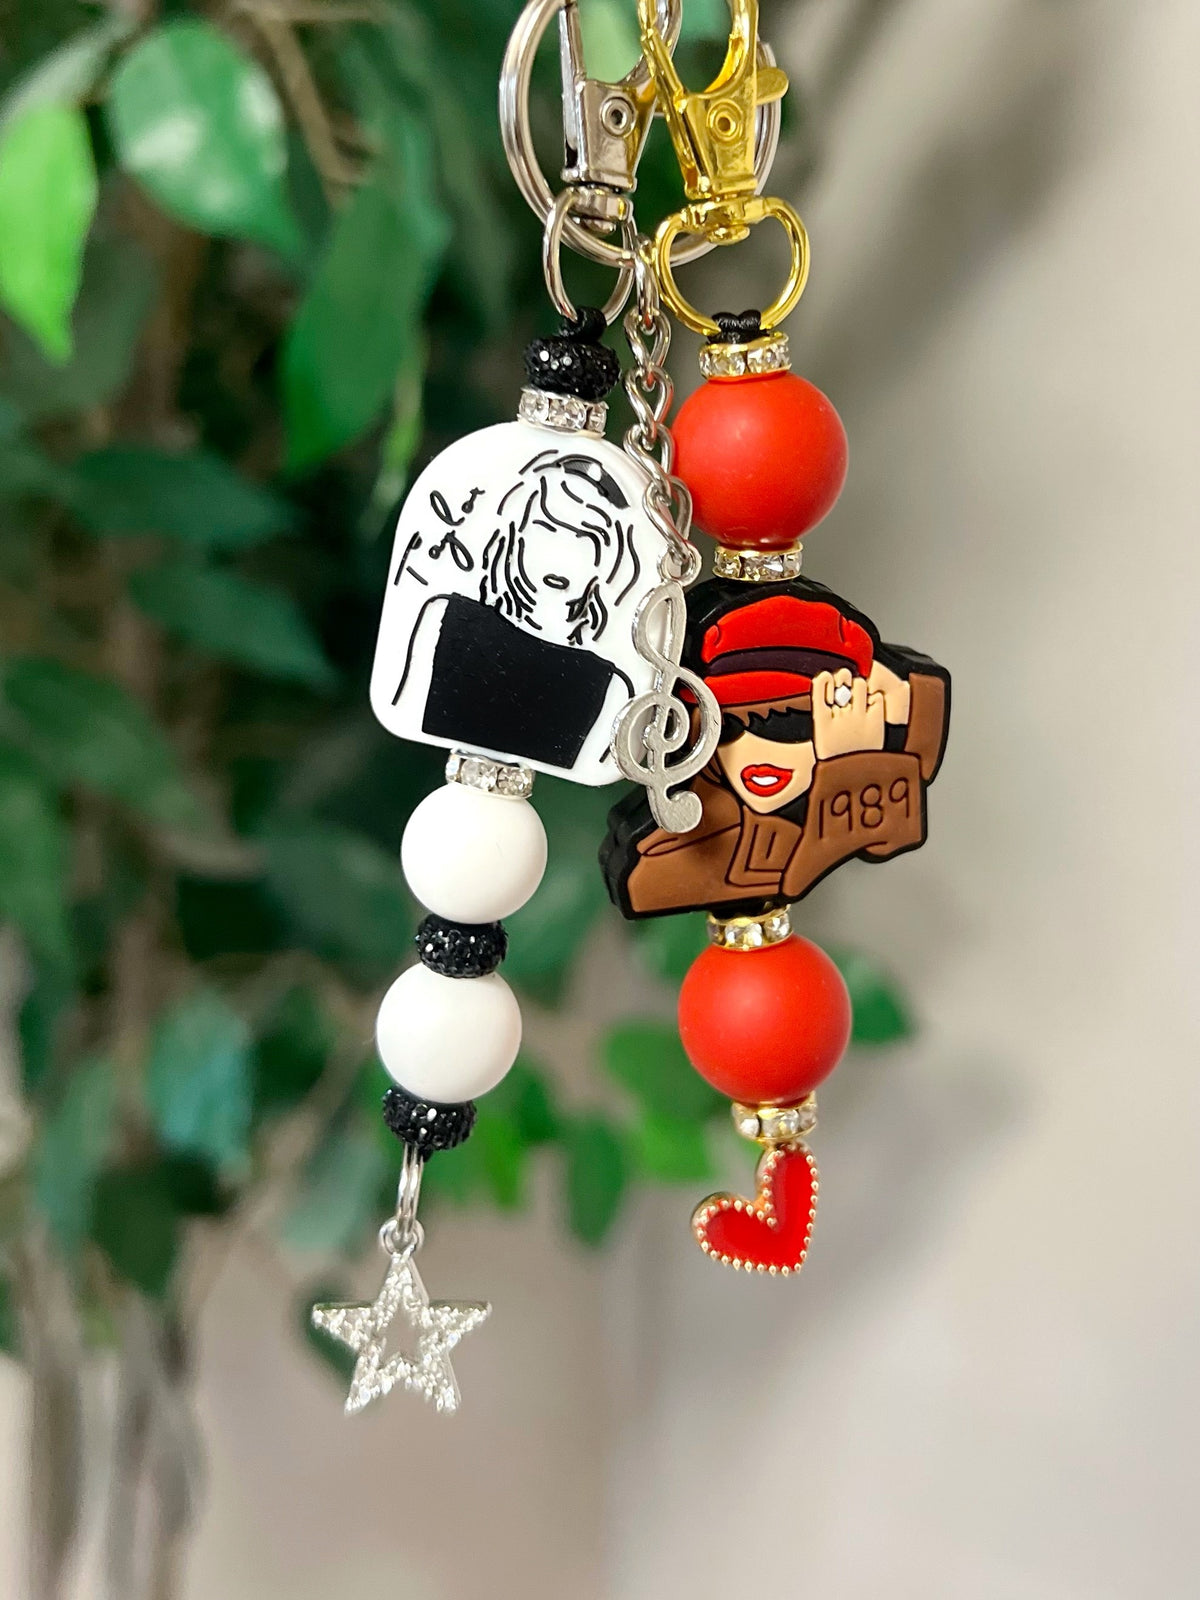 Swiftie Taylor Swift Silicone Keychain Black & White or 1989 Brown & Red with Hat Option. Includes Silicone Focal Bead, Silicone Accent Beads, Bead Spacers and Optional Keyring Split Ring Charms & Tassels.